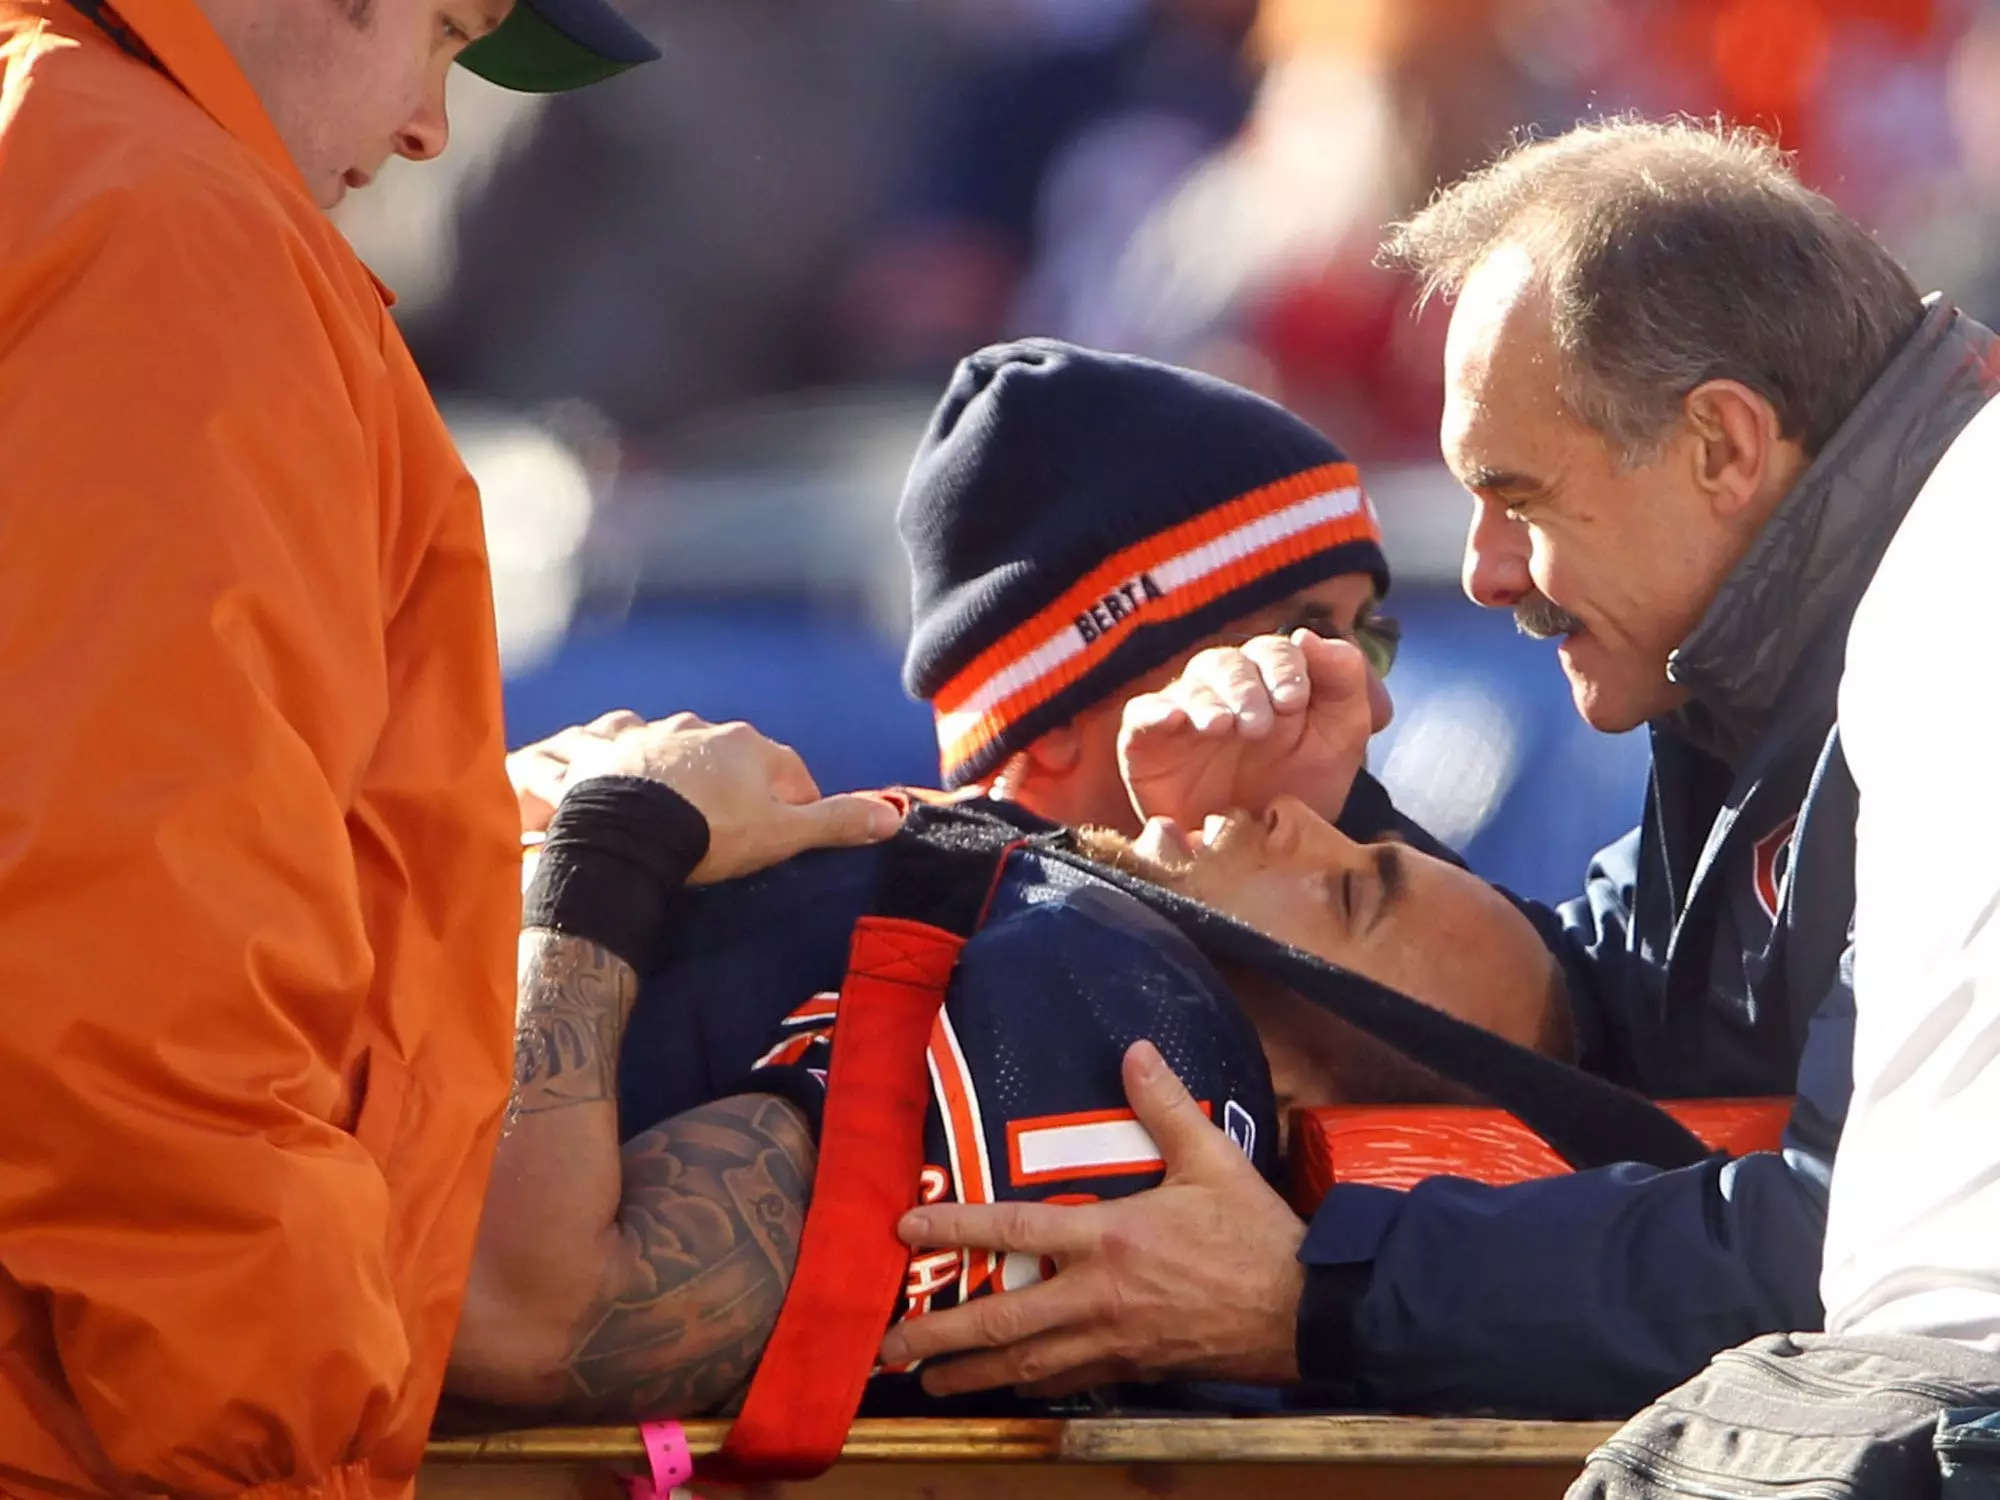 Johnny Knox is seen surrounded by medical staff while laying on a stretcher. He has a pained expression on his face.